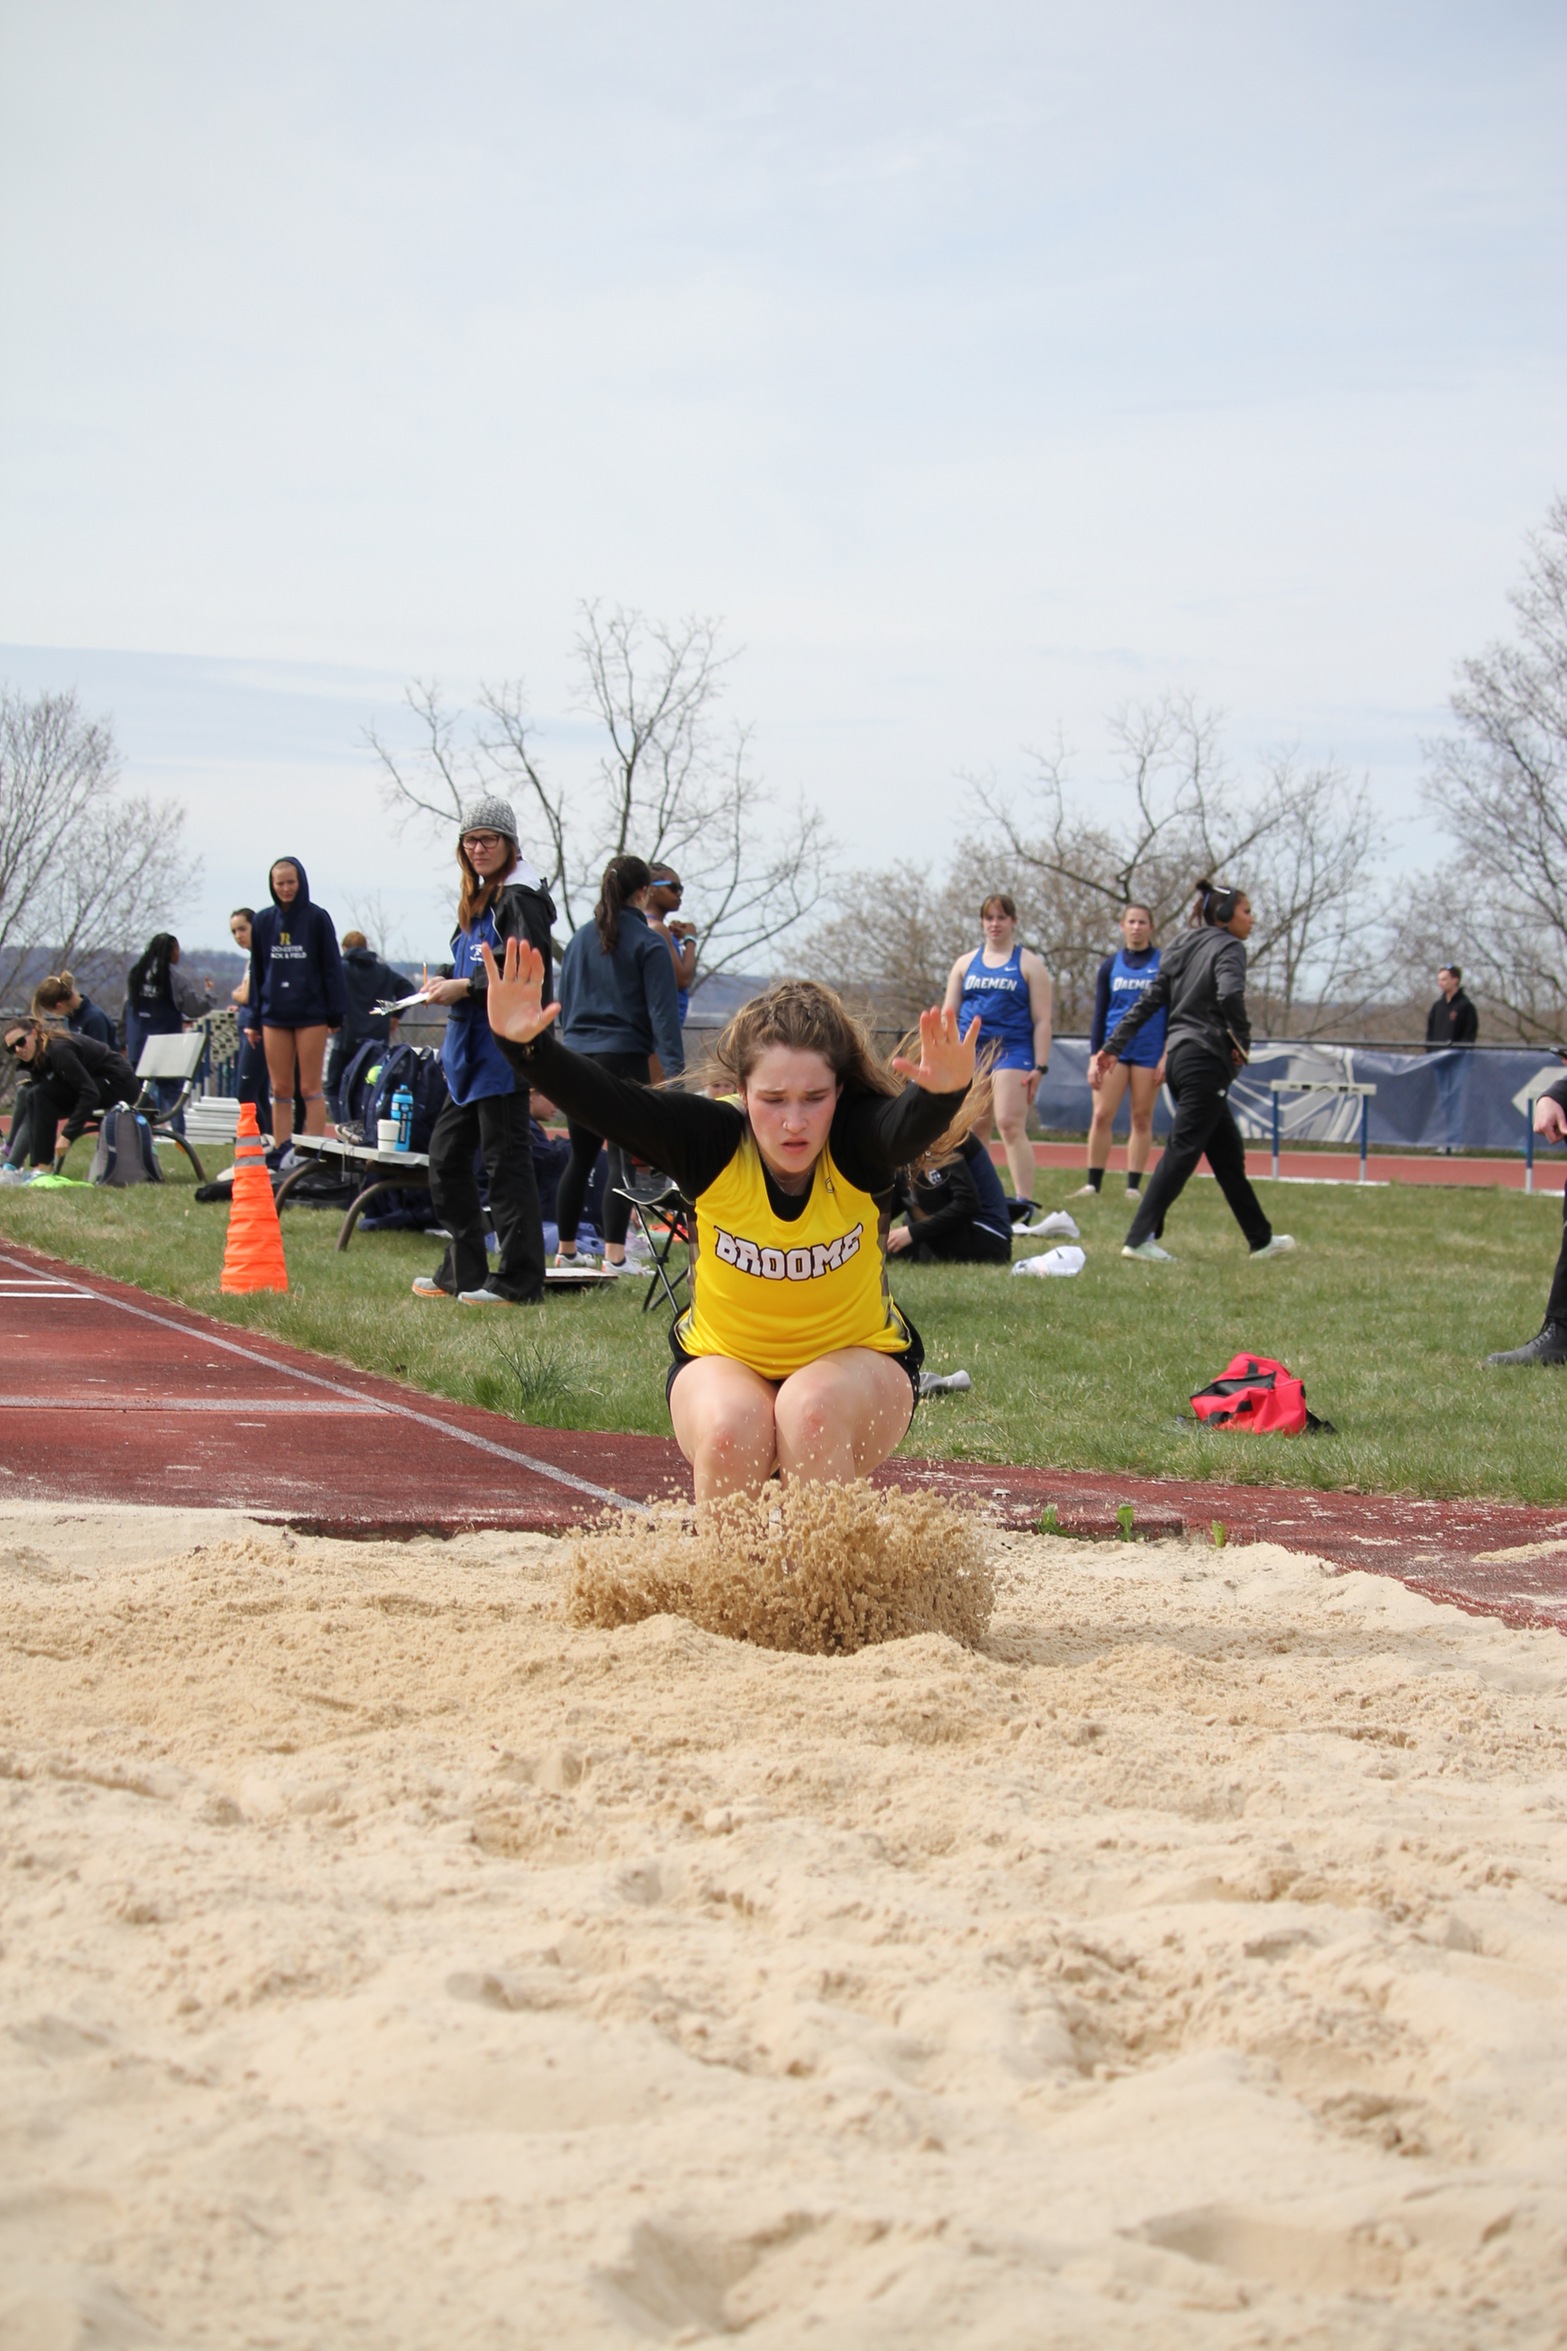 Broome track and field member jumping